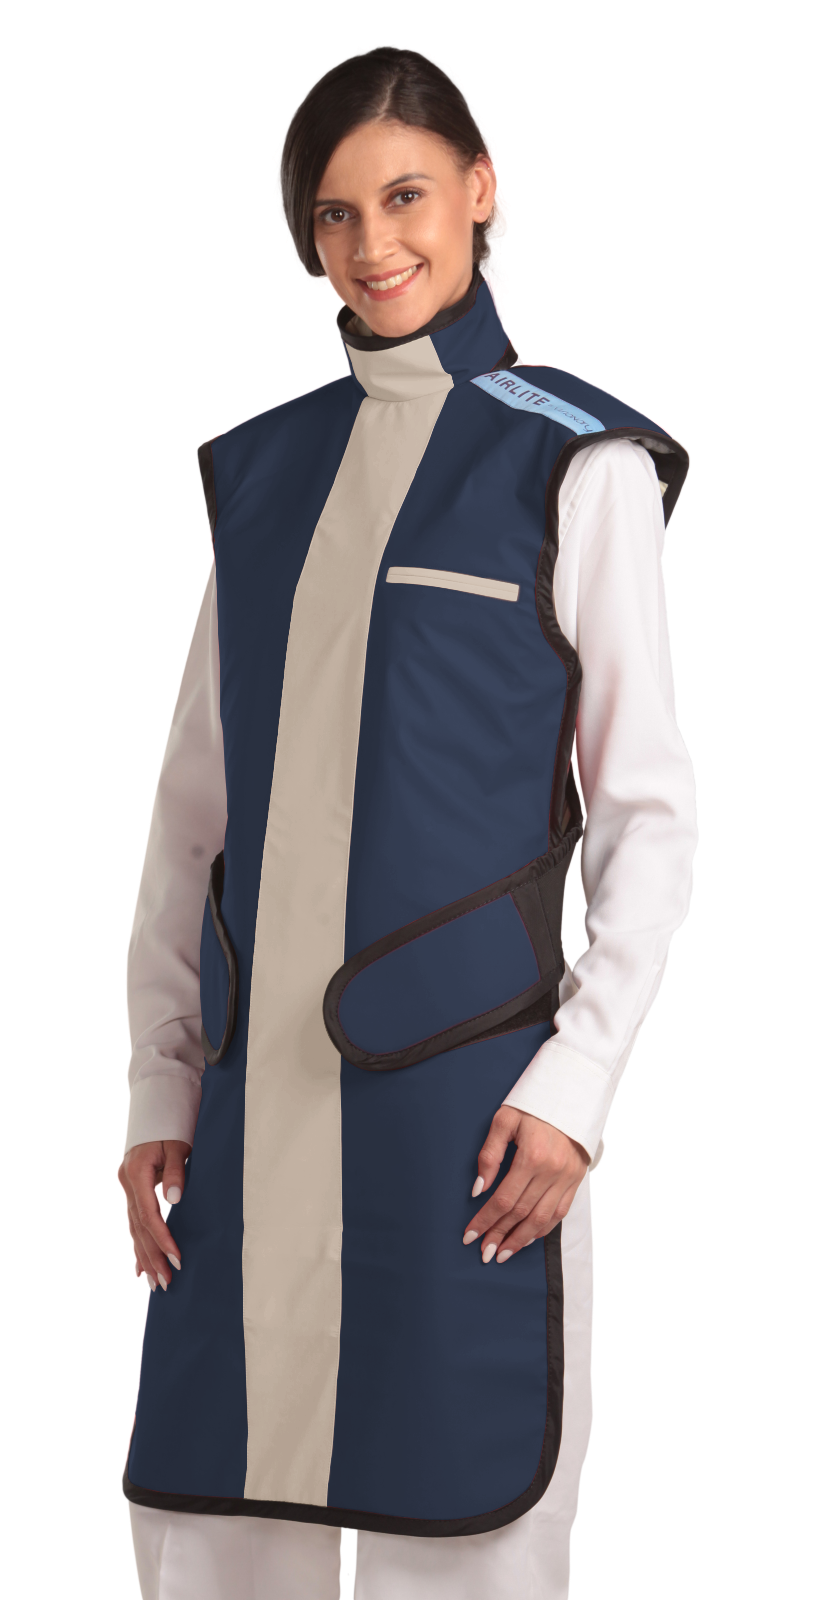 Frontal left-side view of a female model wearing a coat apron with an integrated thyroid guard. The apron is Navy blue with a beige-colored center line and has velcro fasteners by the sides.